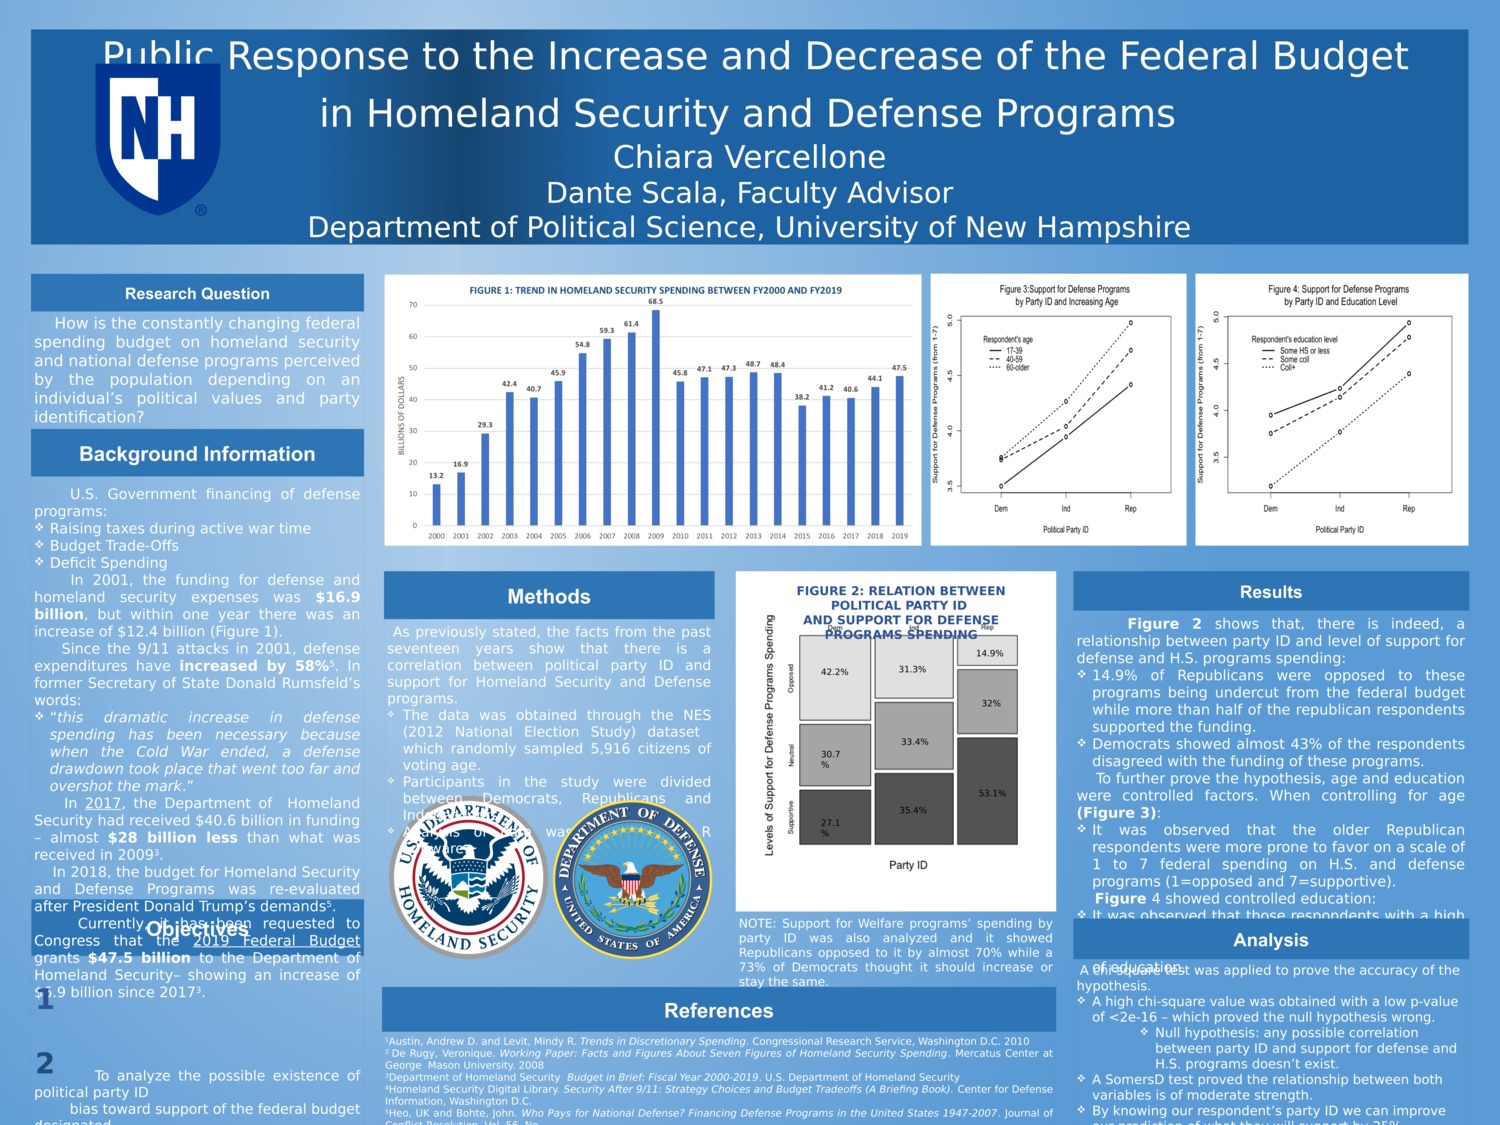 Public Response To The Increase And Decrease Of The Federal Budget In Homeland Security And Defense Programs by cv1011